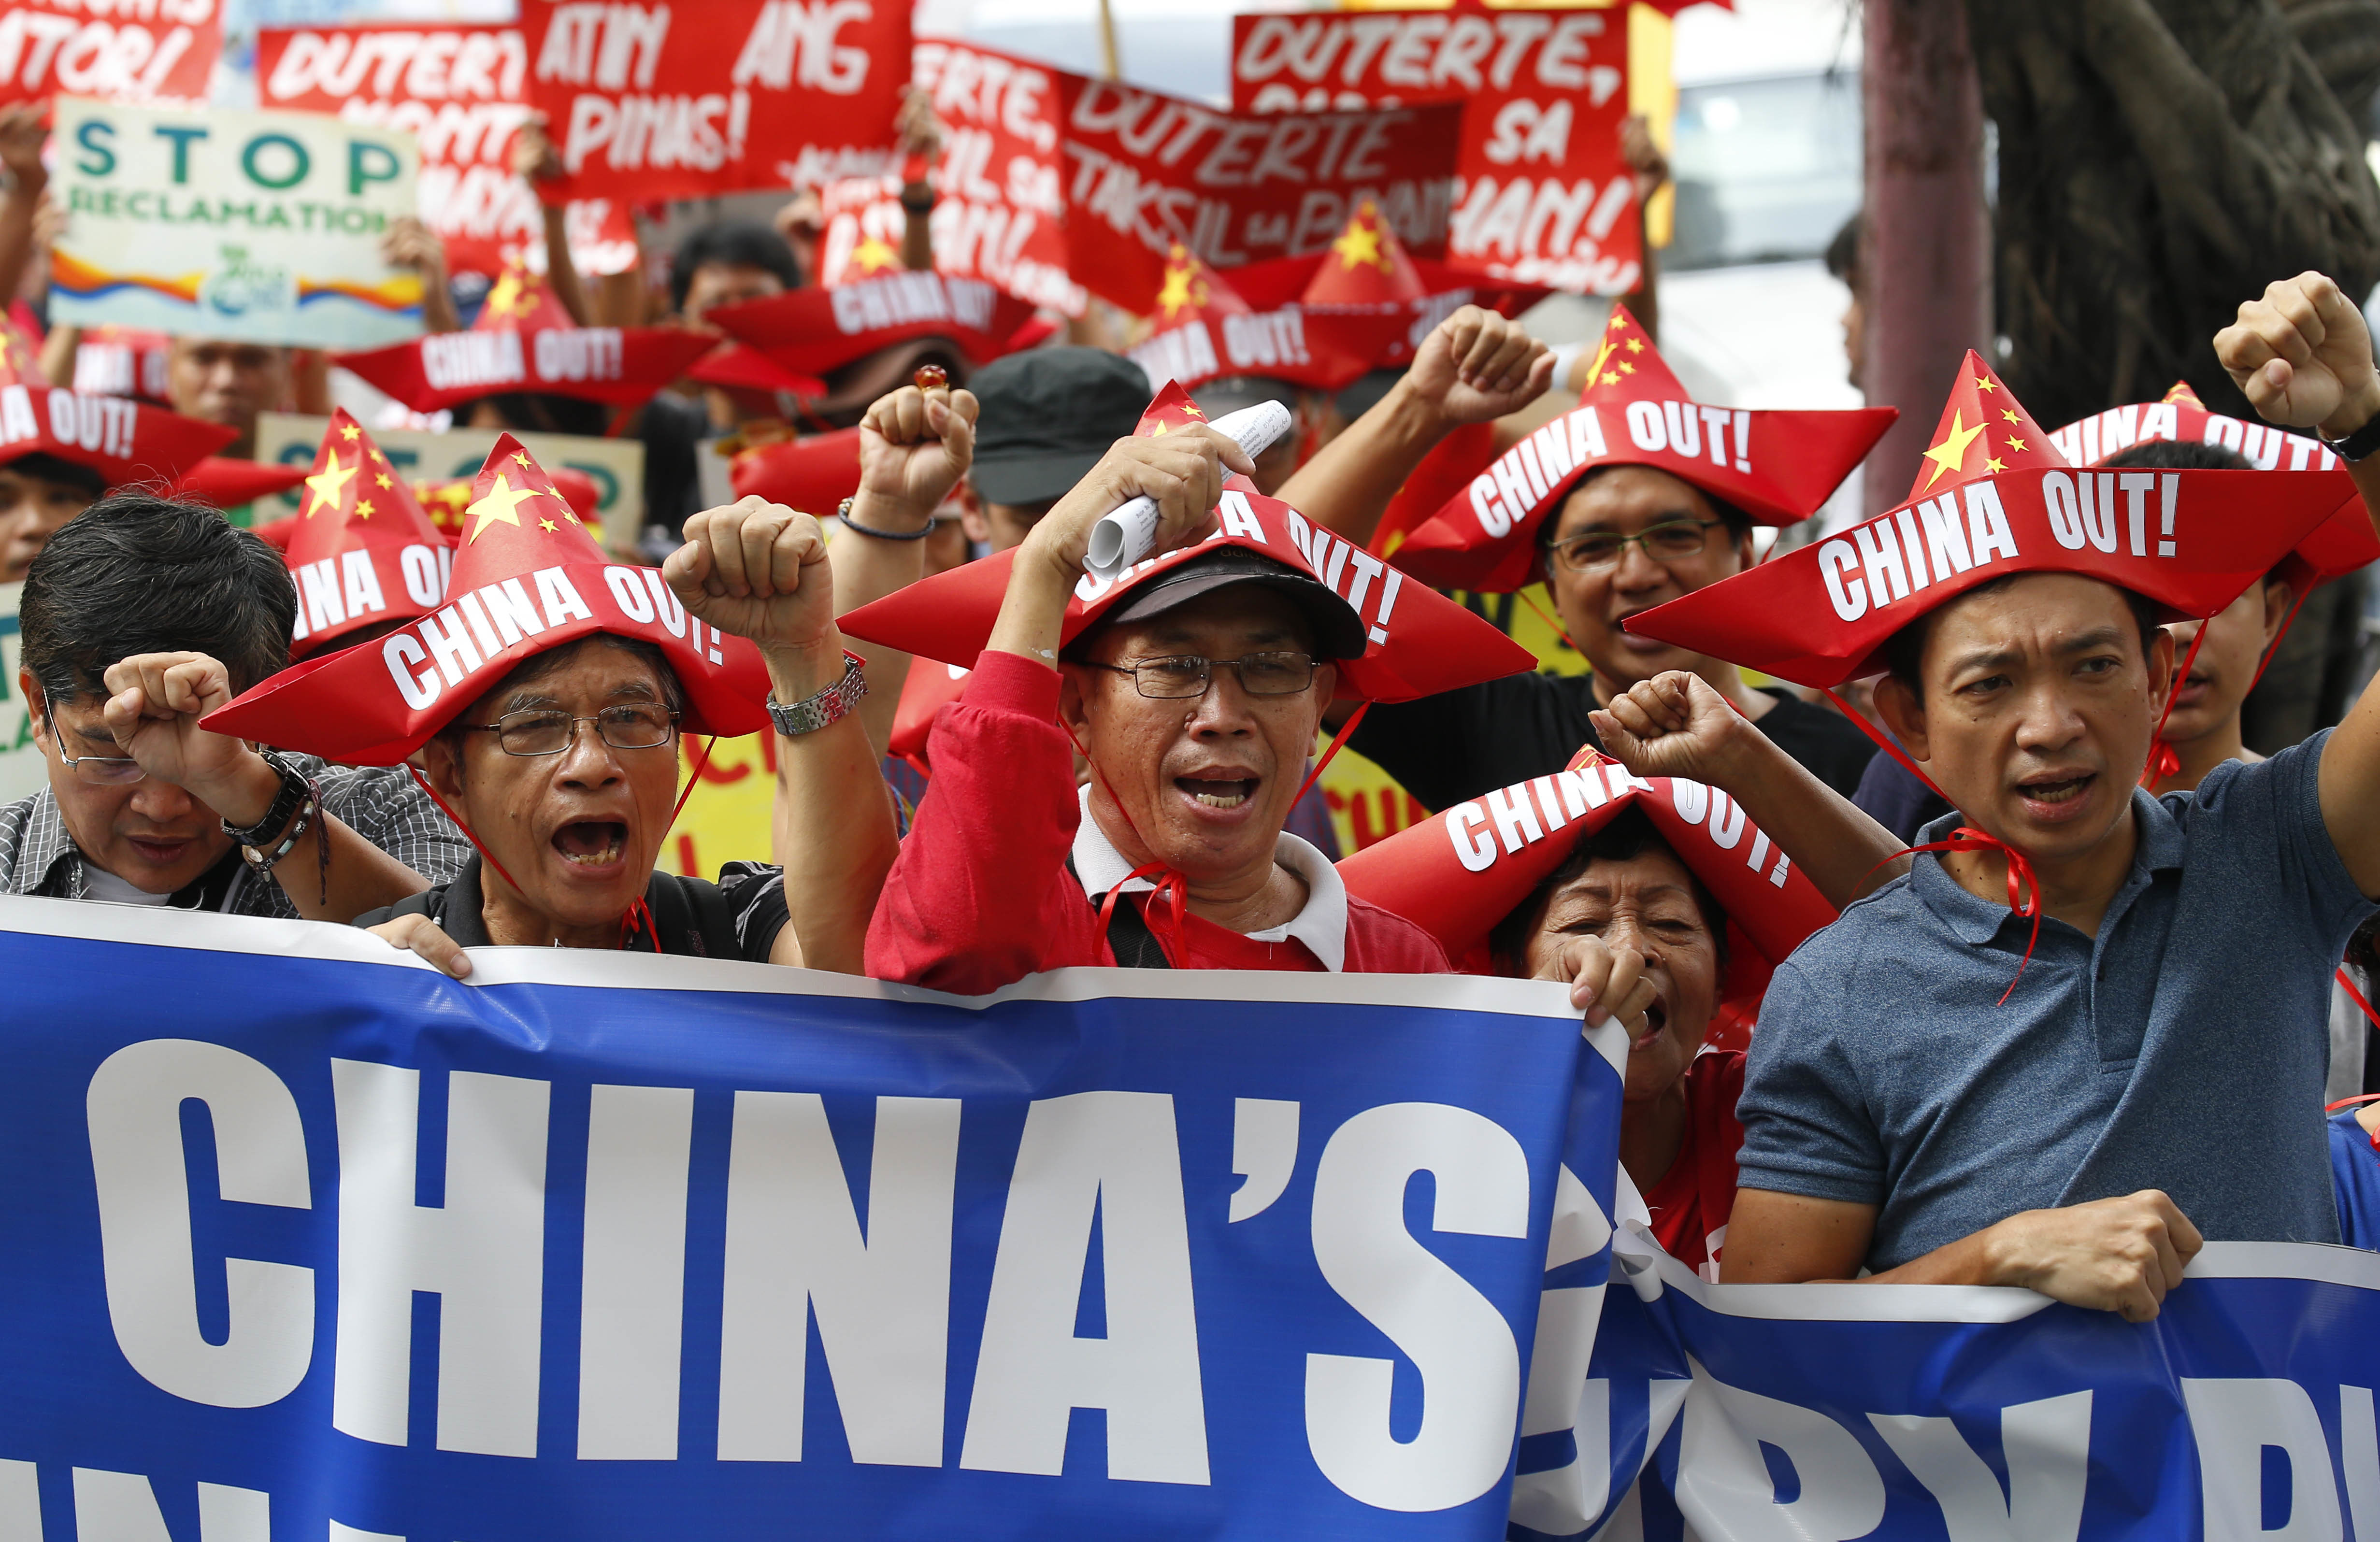 Protesters, wearing boat-shaped paper hats, shout slogans as they march for rally at the Chinese Consulate to protest China's alleged continued militarization of the disputed islands in the South China Sea known as Spratlys Saturday, Feb. 10, 2018 in the financial district of Makati city east of Manila, Philippines. The protesters also denounced President Rodrigo Duterte's inaction over China's continued build up of military facilities and structures at the disputed islands. (AP Photo/Bullit Marquez)